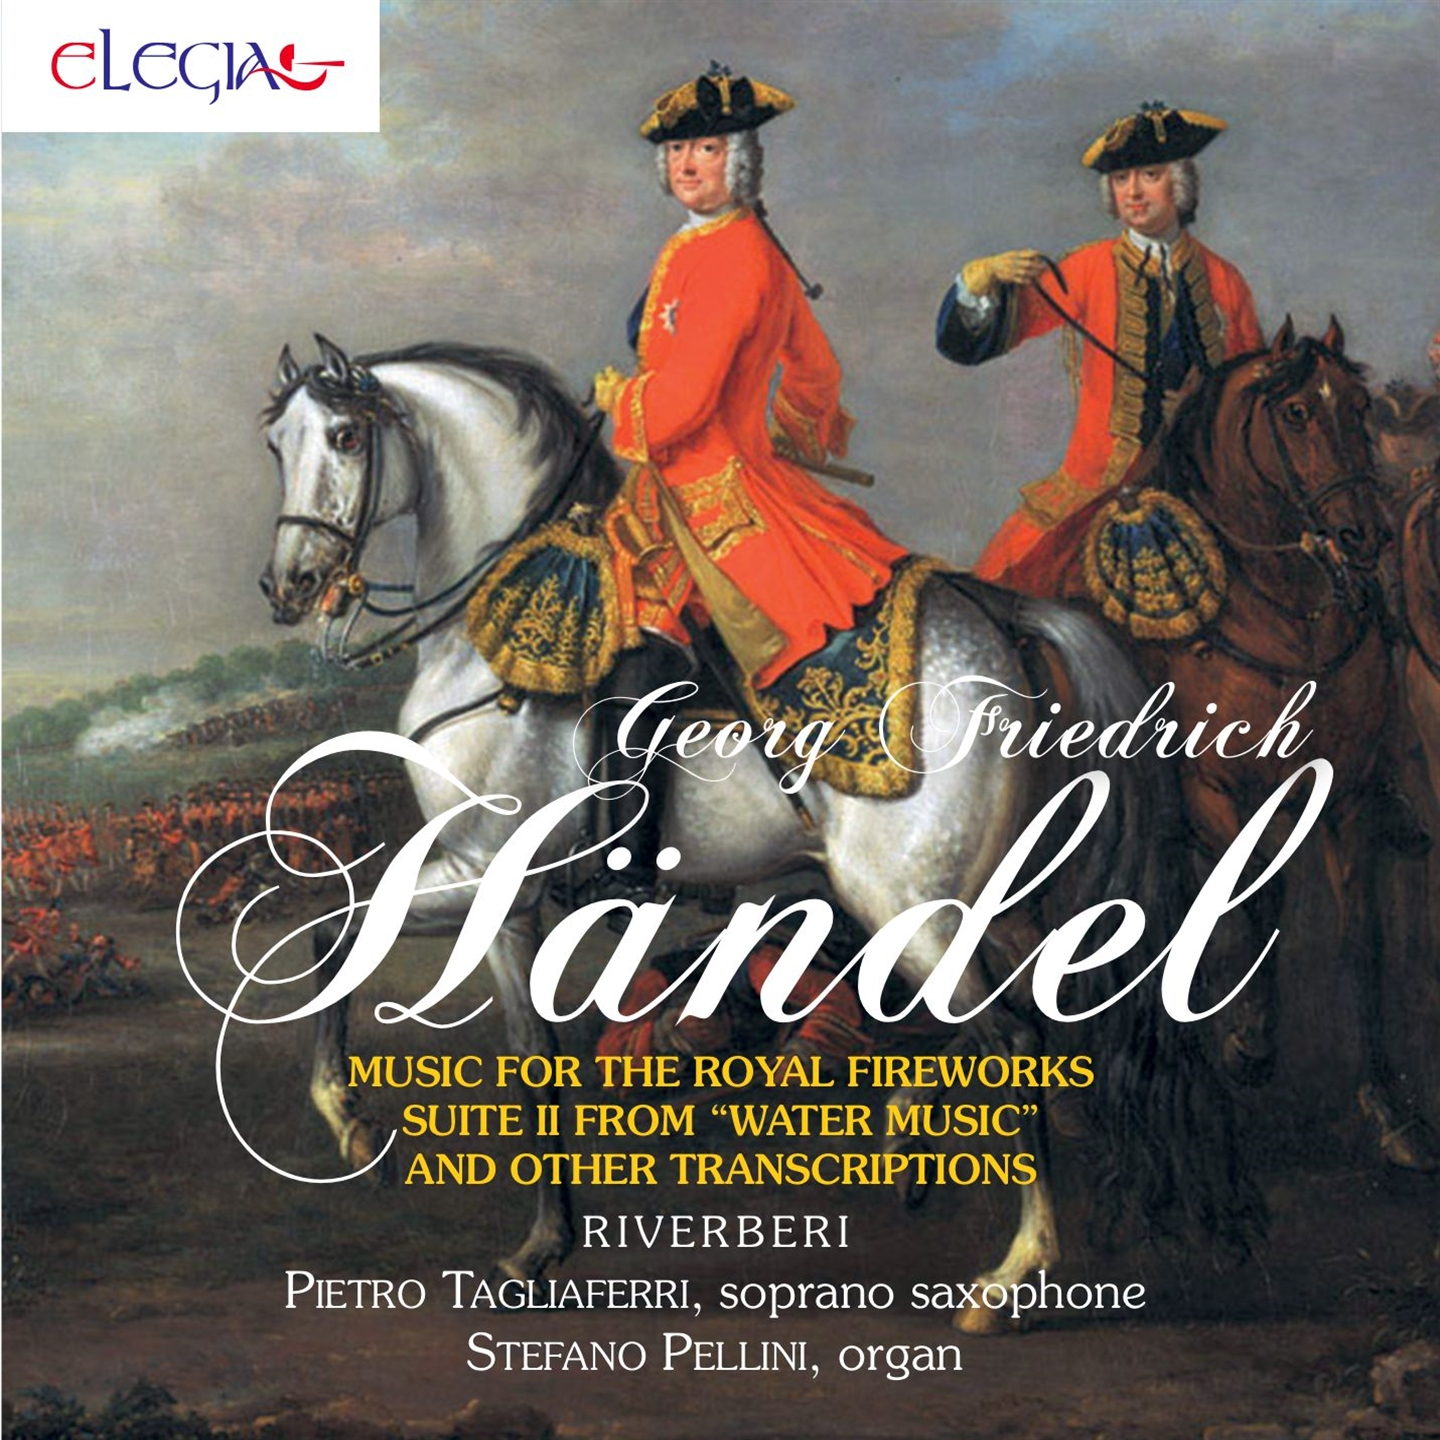 HANDEL: MUSIC FOR THE ROYAL FIREWORKS, SUITE II FROM “WATER MUSIC” AND OTHER TR